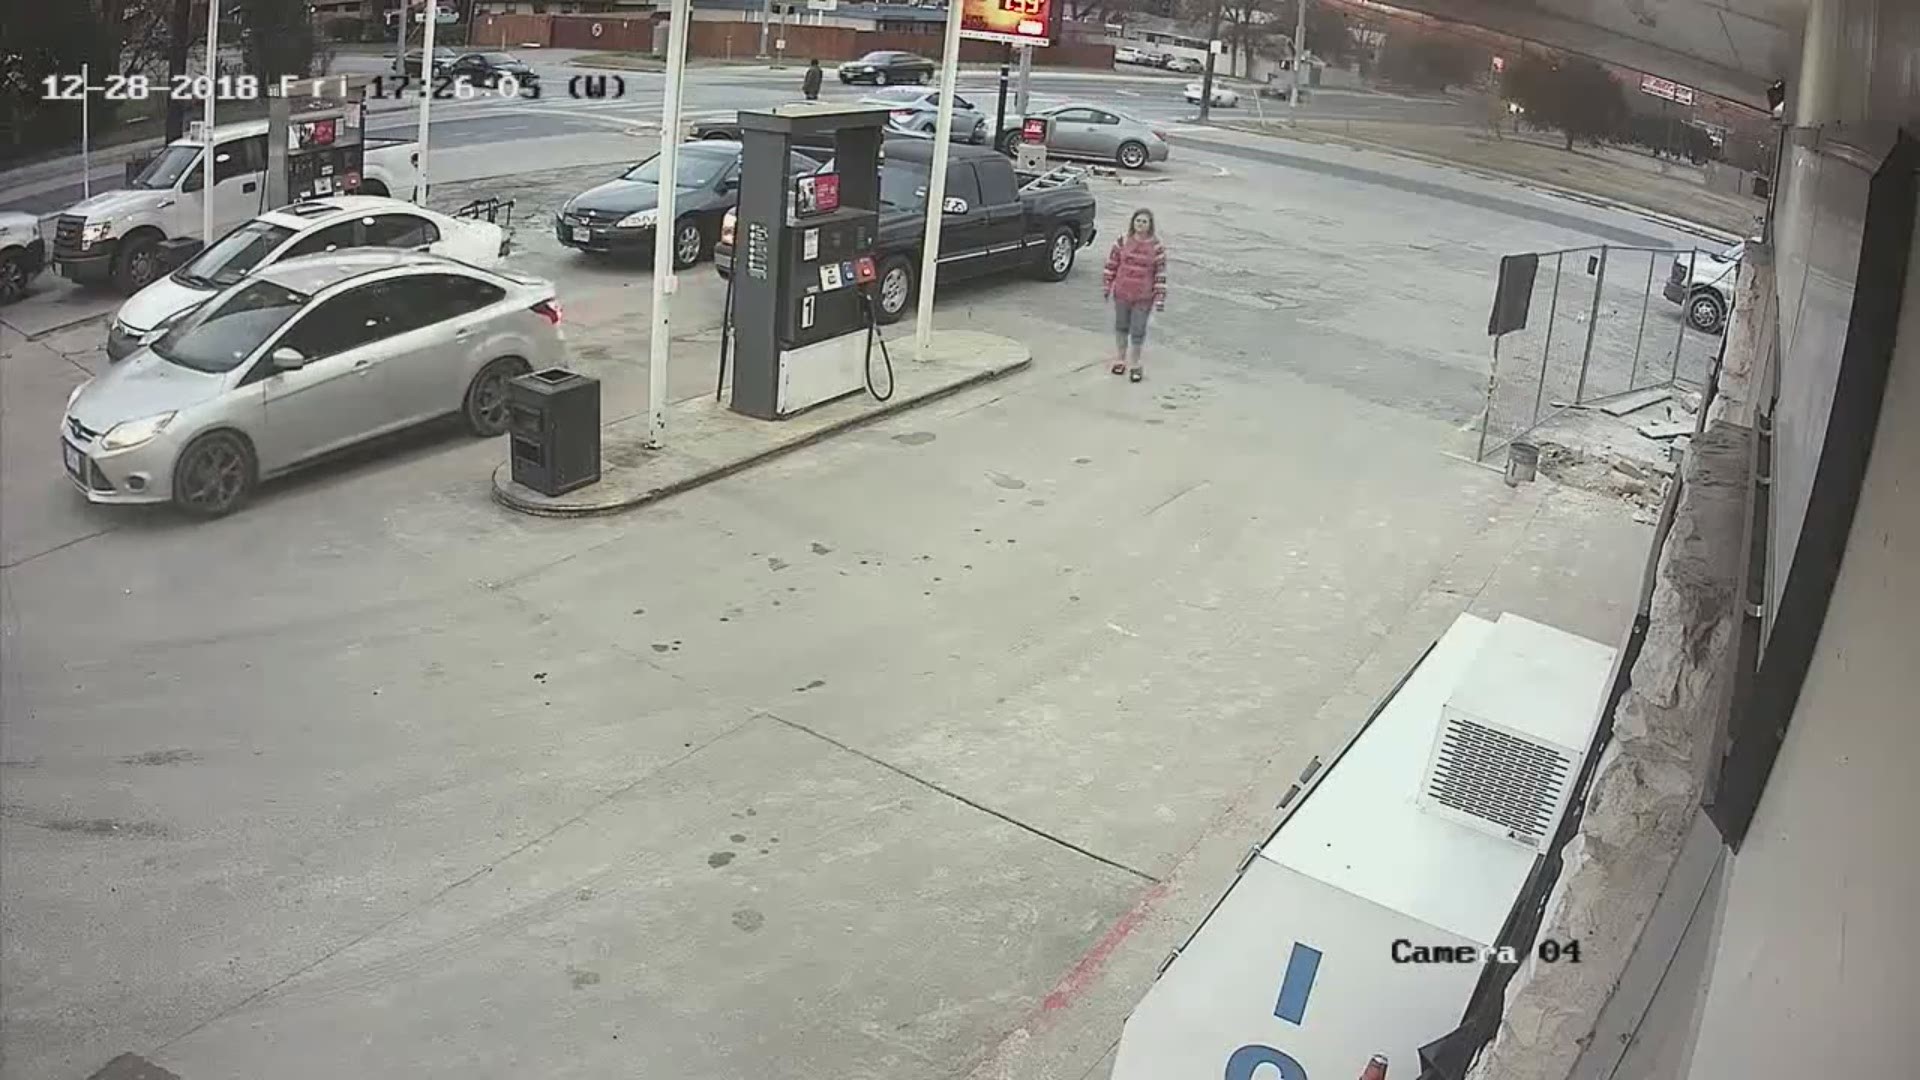 Days before her body was found naked in the woods in Austin, a video shows her walking through the parking lot of a gas station.